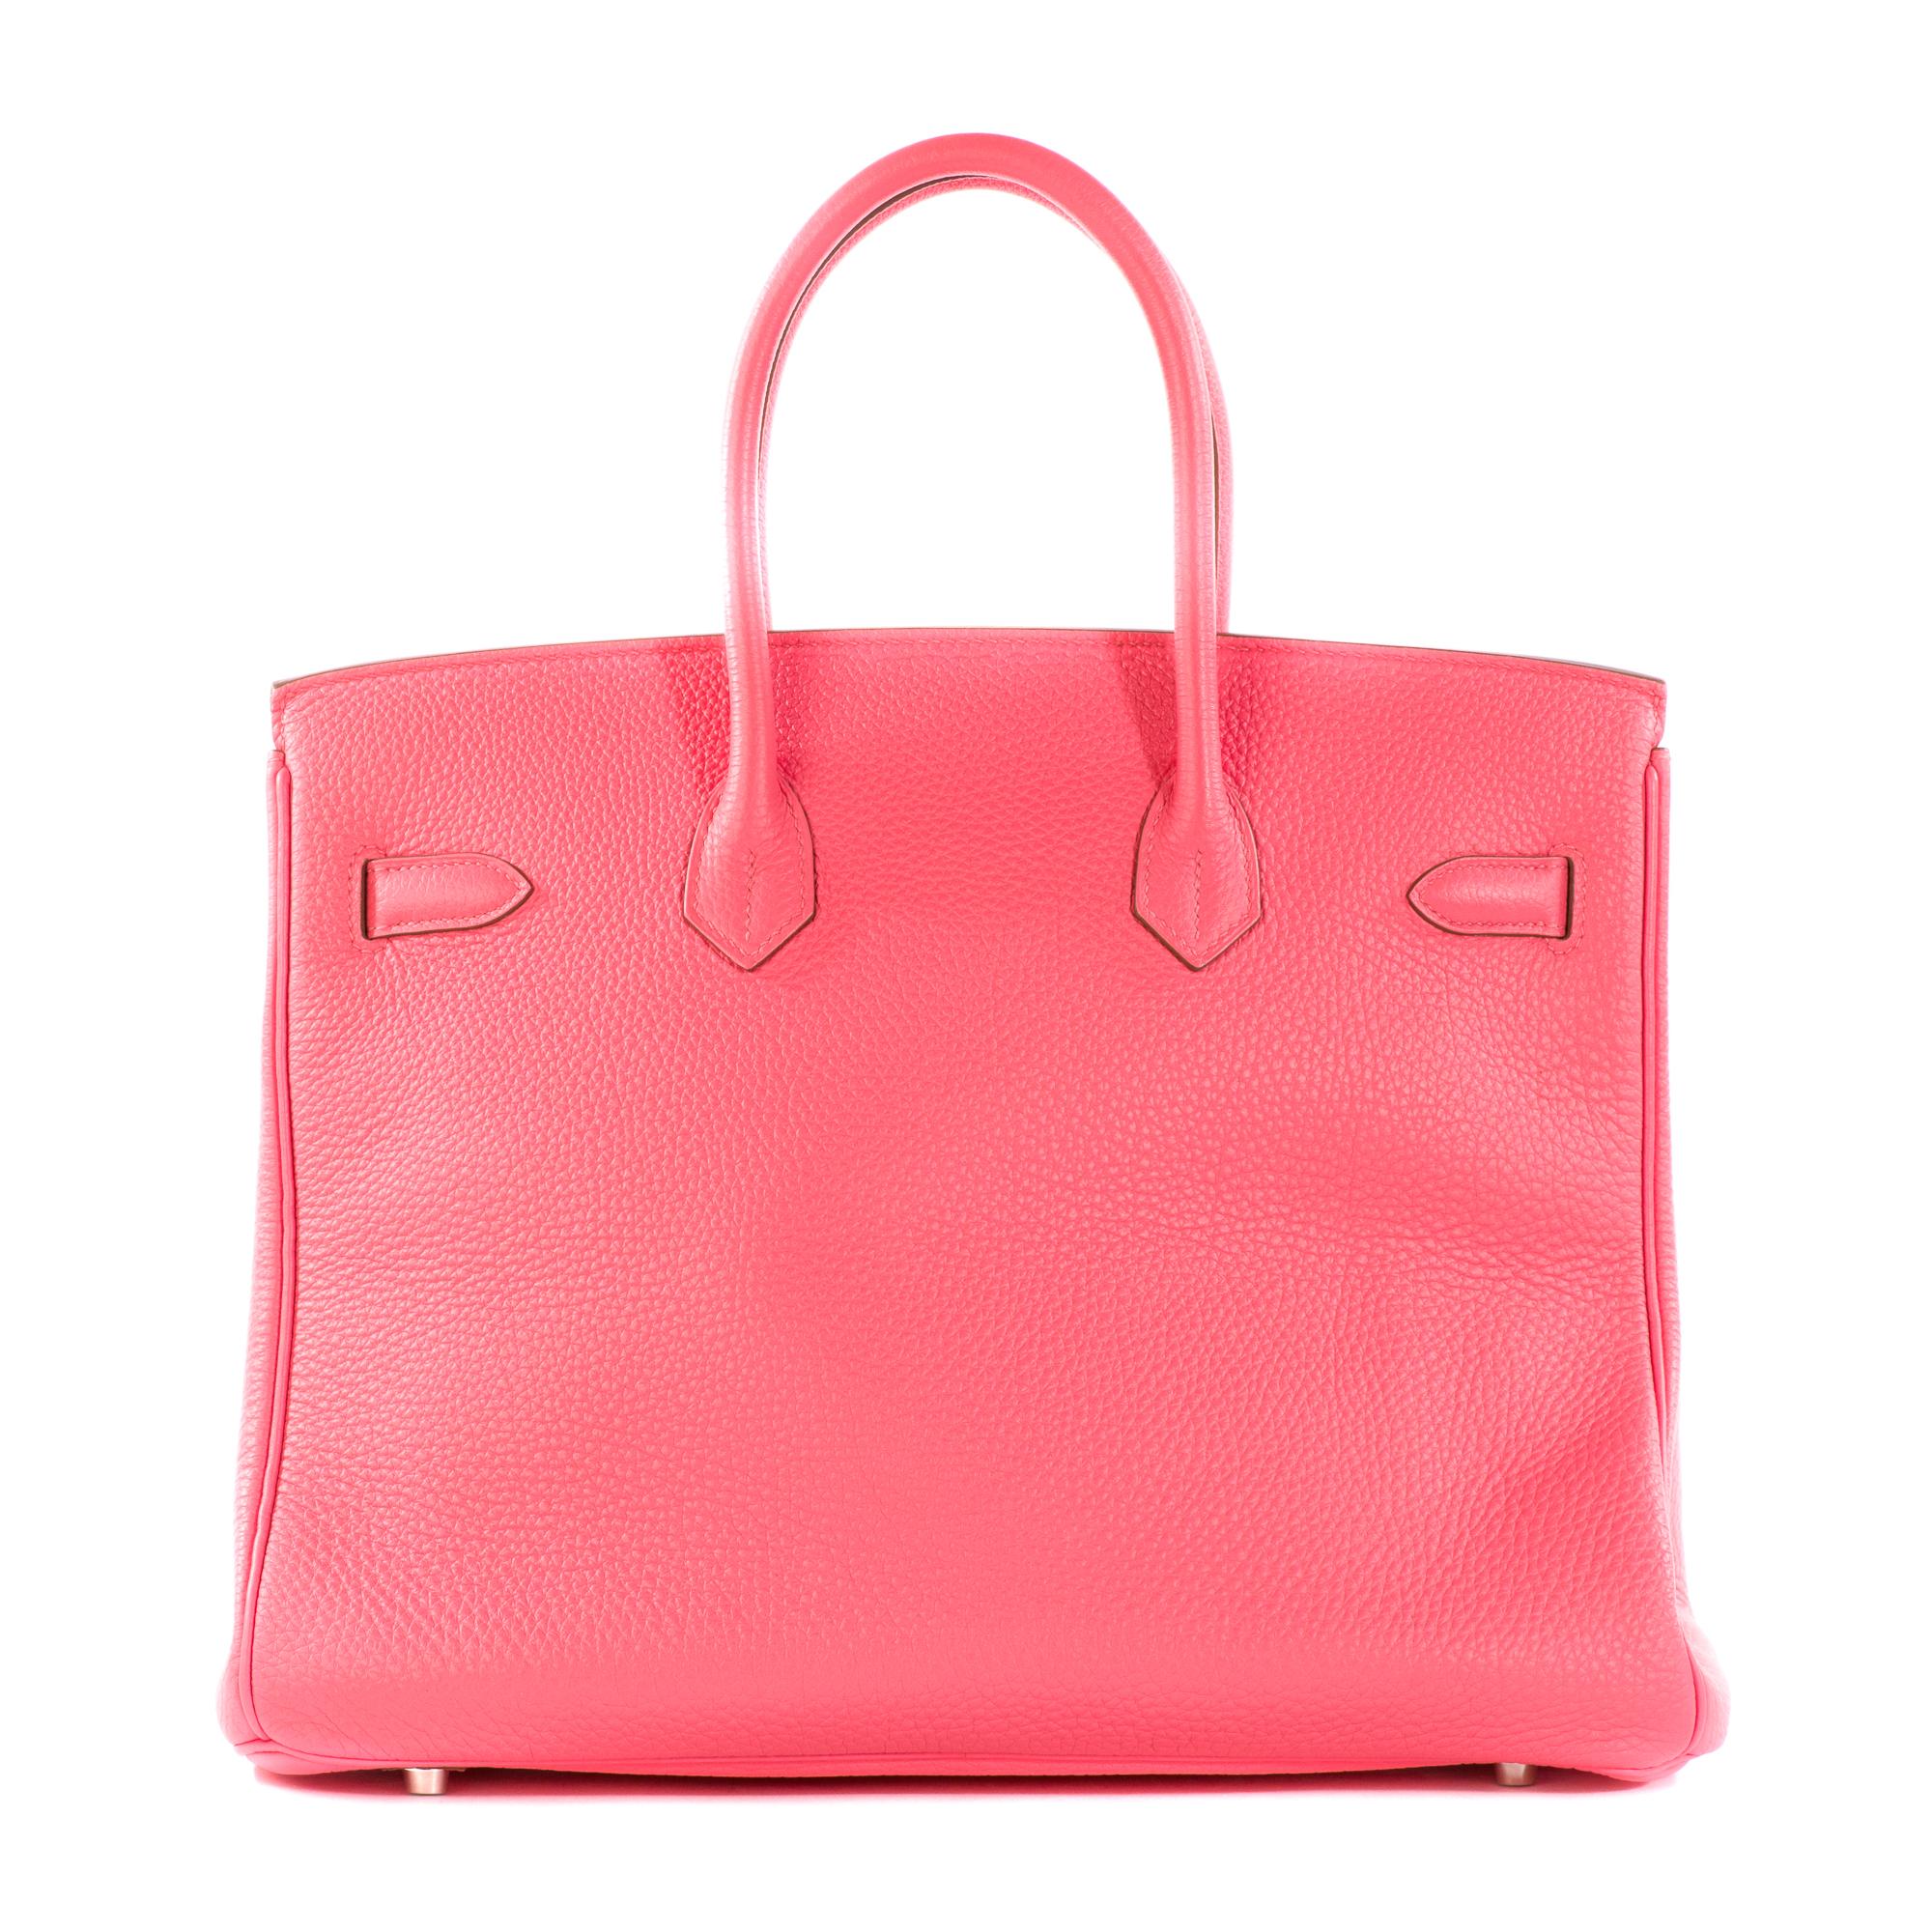 Hermès Birkin 35  Exquisite U5 rose lipstick in Togo smooth leather , which is a light pink with white undertones.  Palladium hardware accentuates this handbag and all of the original accessories are included. The stamp is located on the strap of